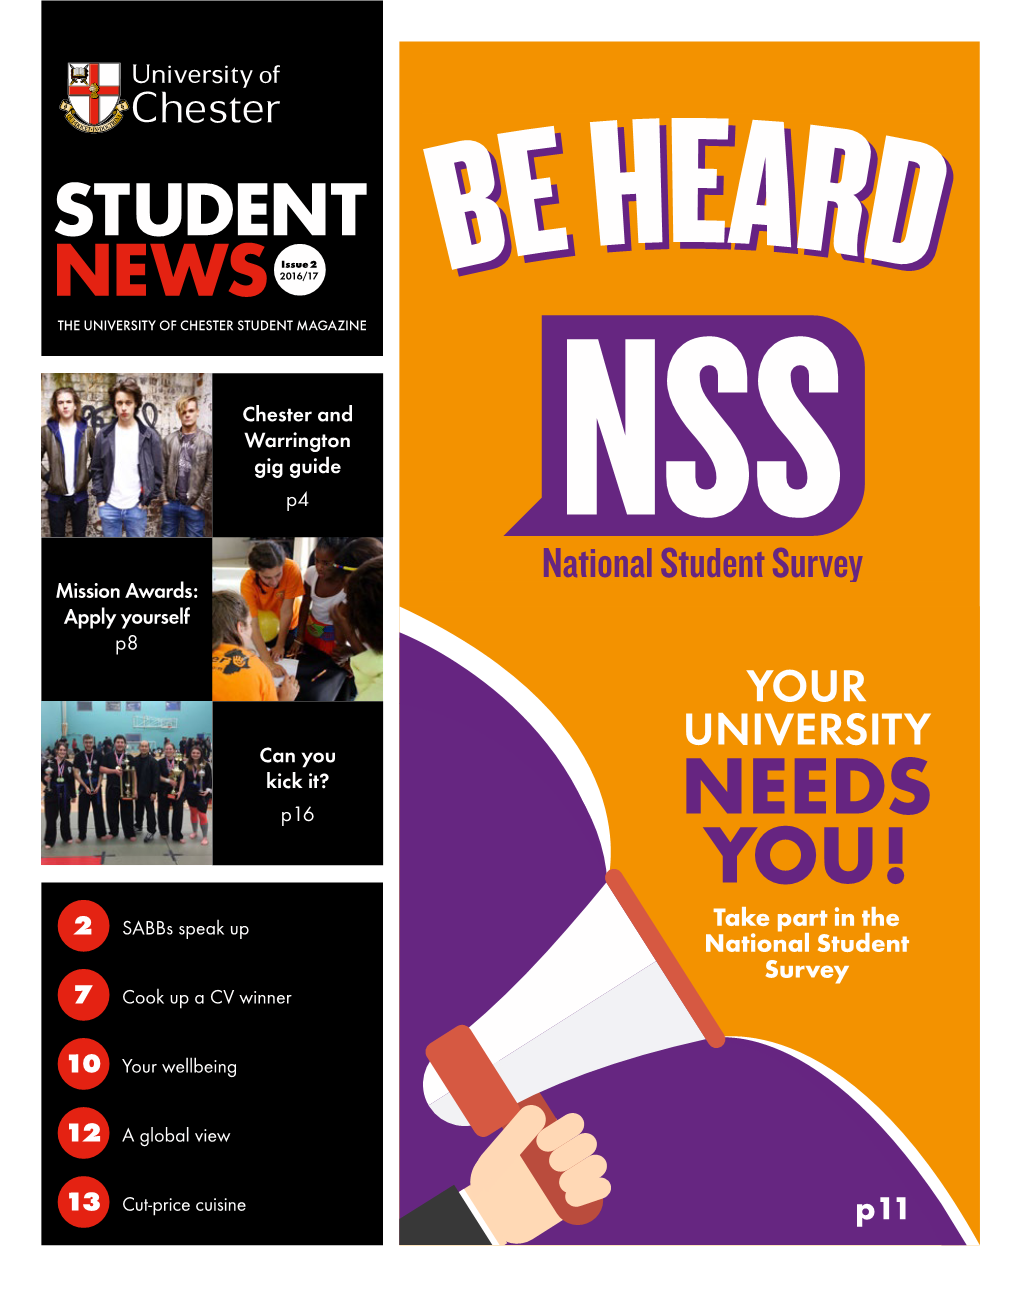 NEEDS YOU! Take Part in the National Student Survey STUDENT